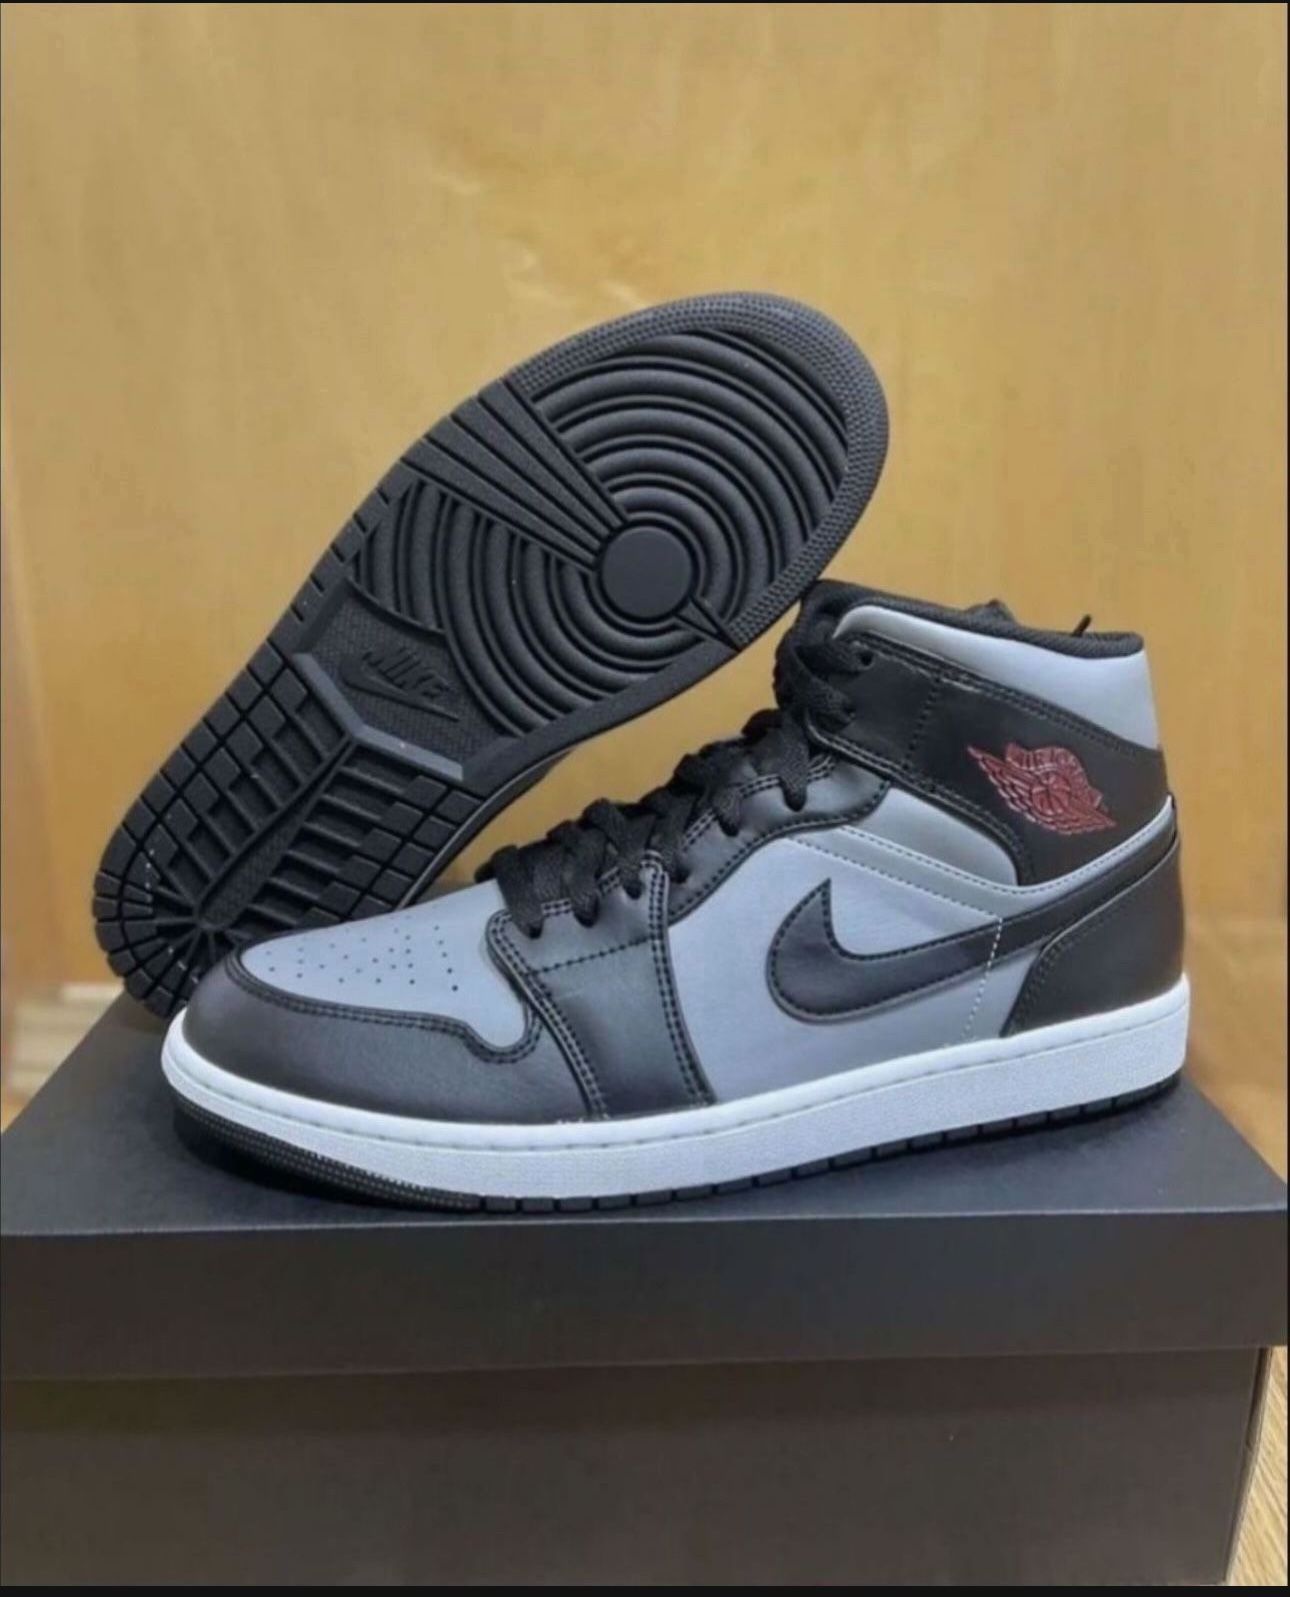 Nike Air Jordan 1 Mid Shadow Particle Grey Black Red Size 12 Brand New